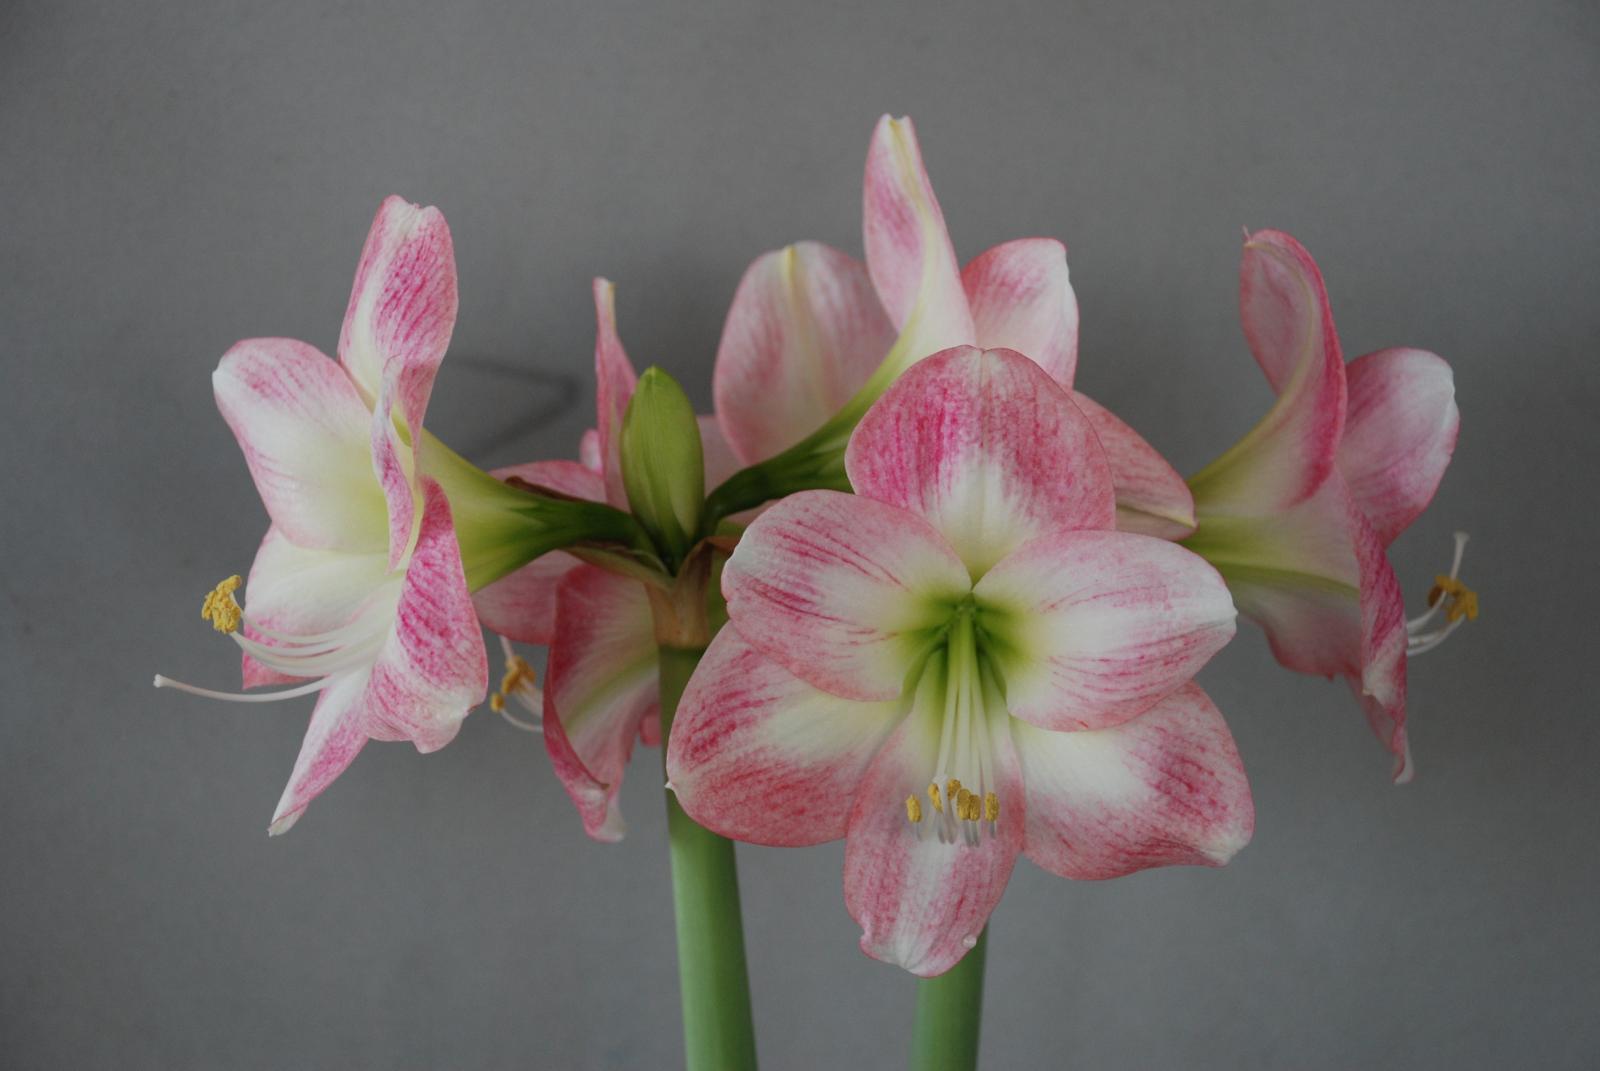 Fig. 1. Potential progeny H1071002 of amaryllis were selected as a single-flowered type in 2018.